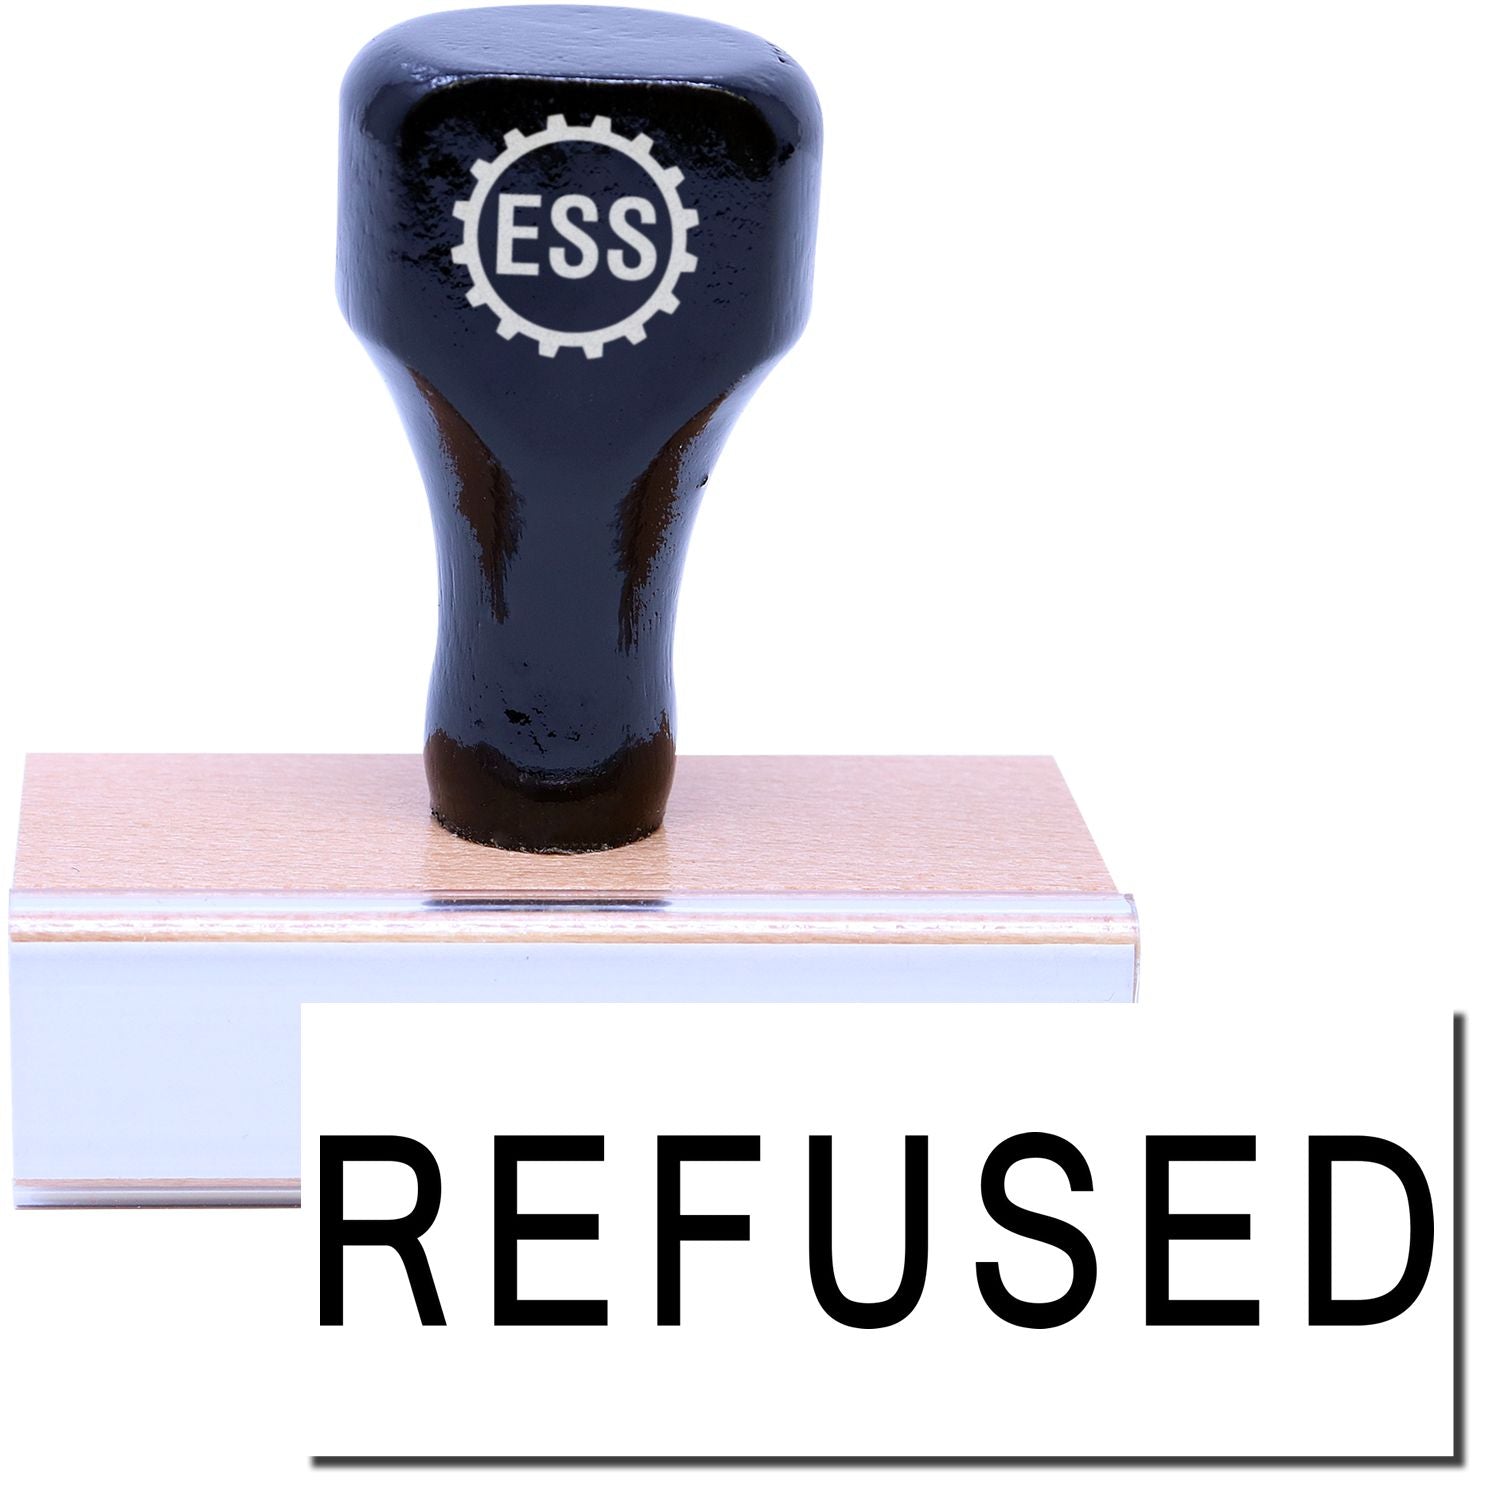 A stock office rubber stamp with a stamped image showing how the text "REFUSED" in a large font is displayed after stamping.